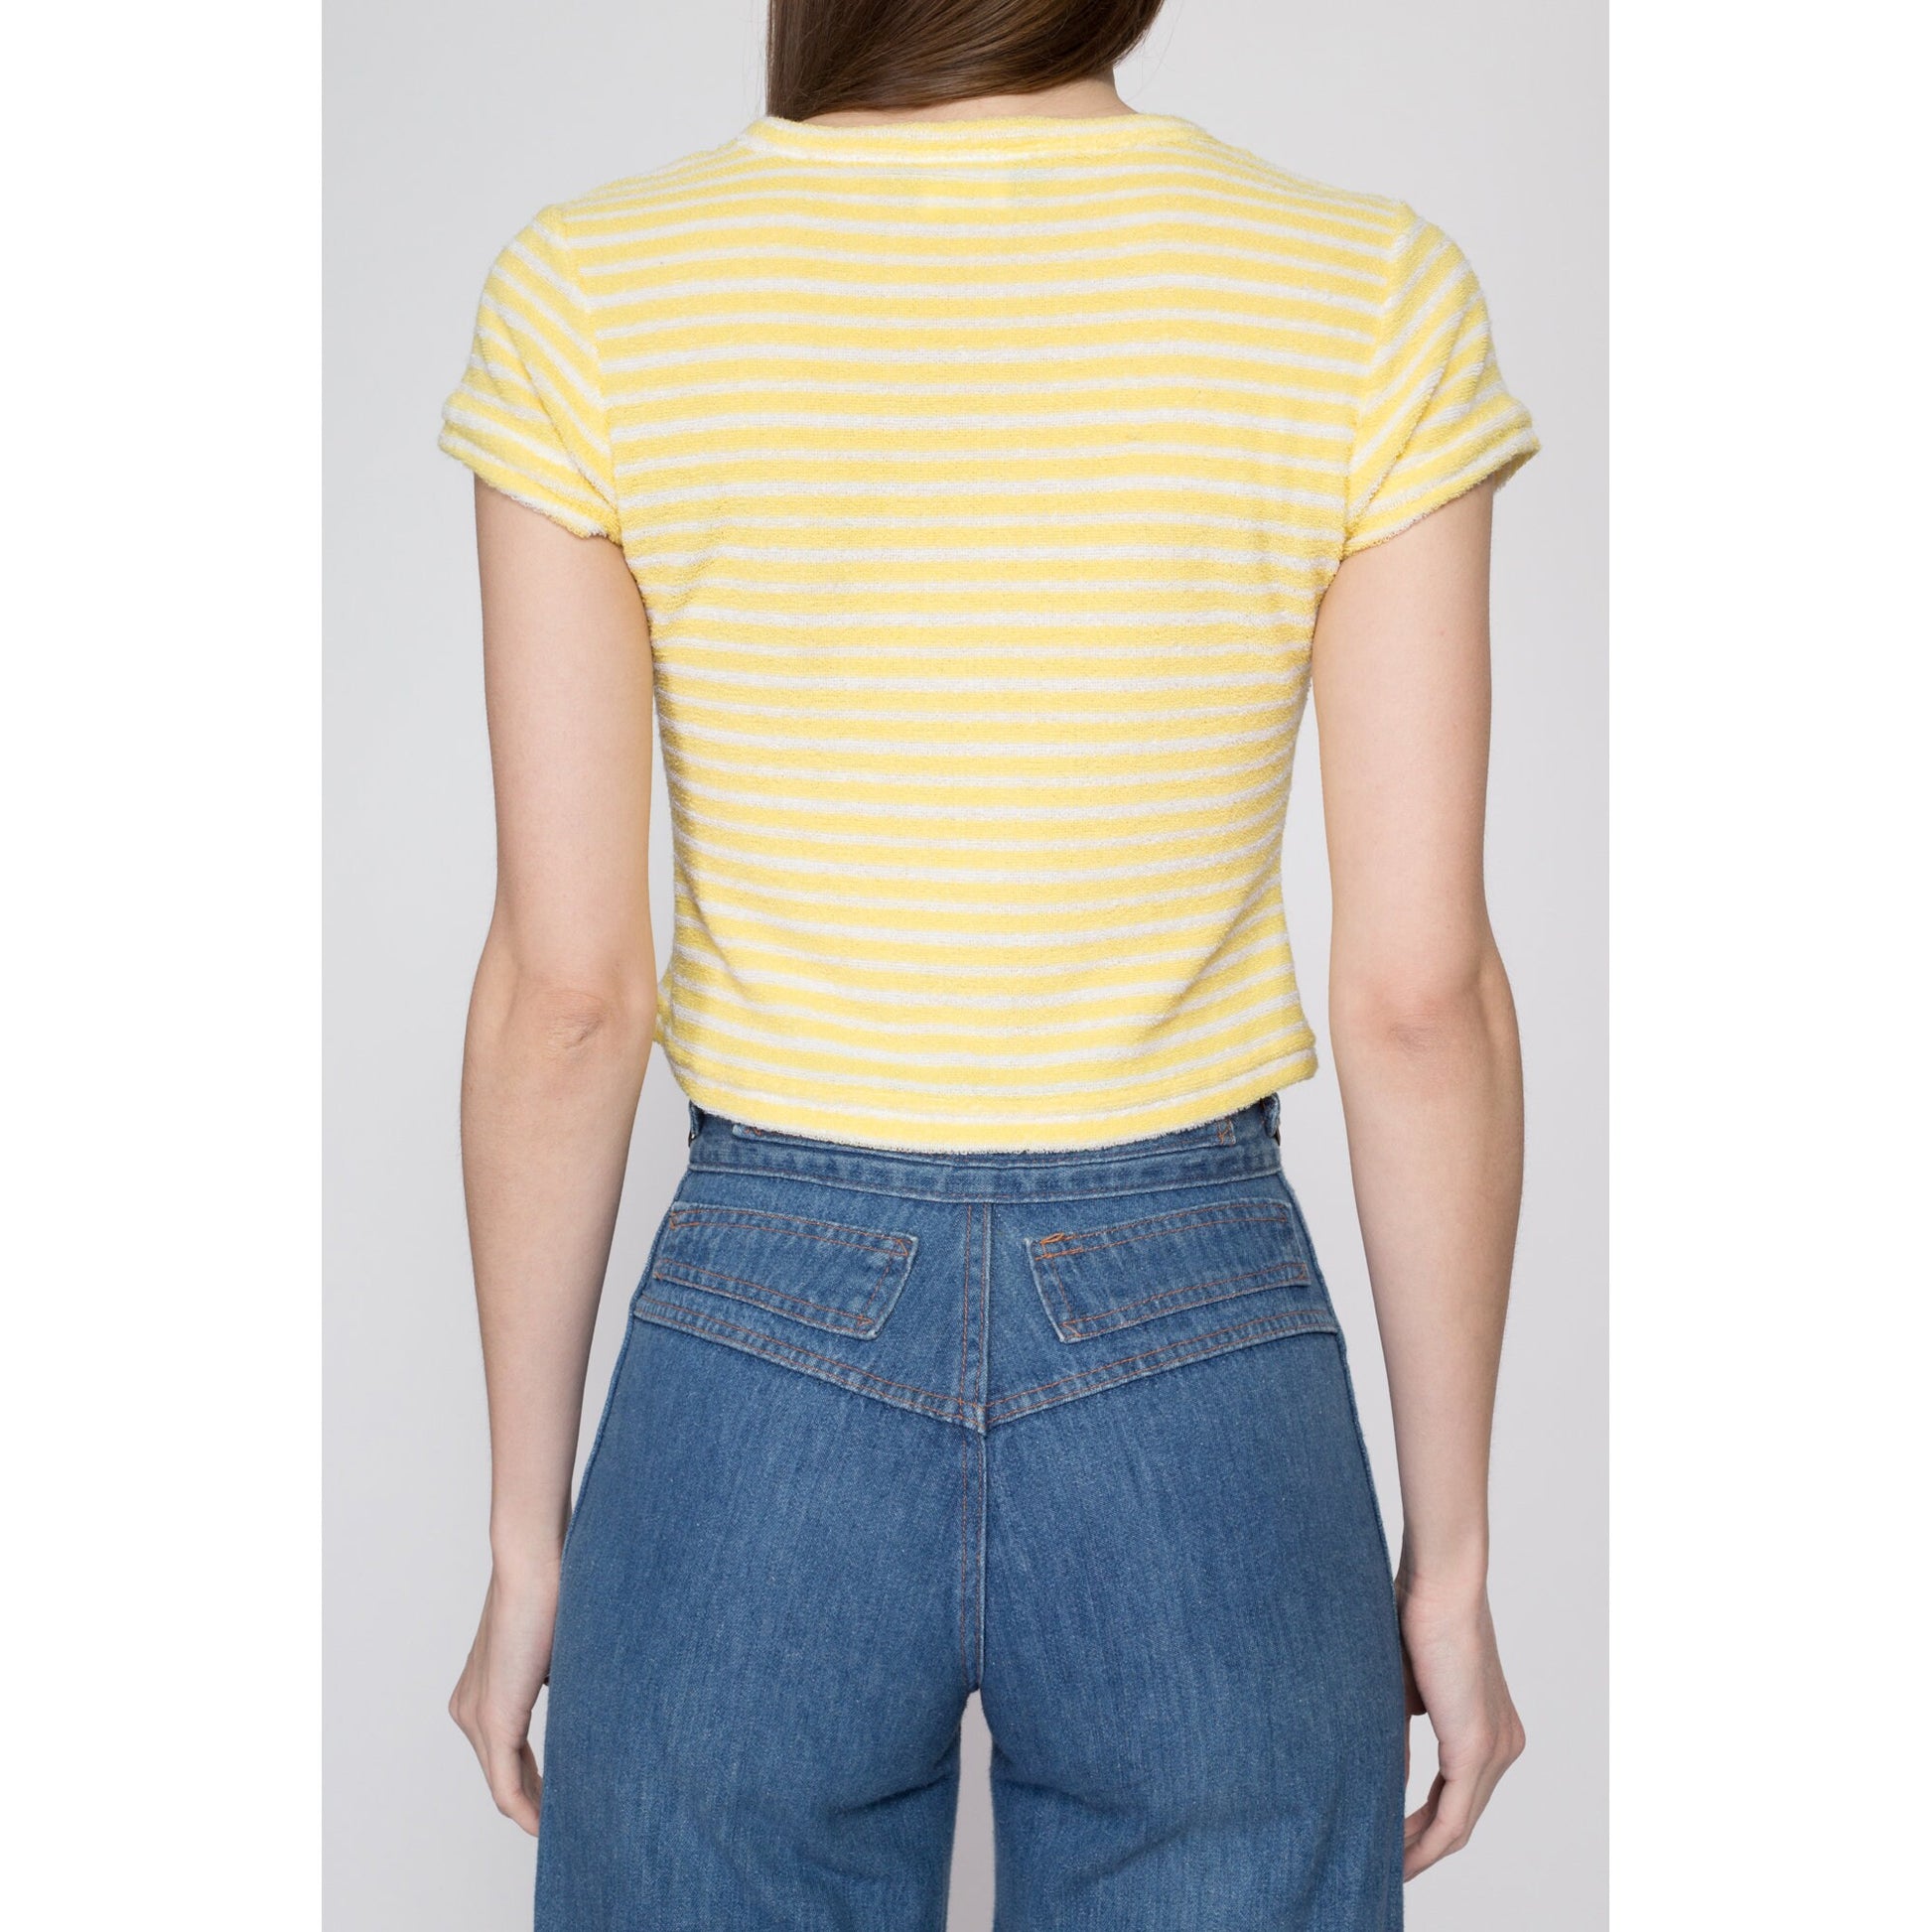 Small 80s Yellow & White Striped Terrycloth Crop Top | Retro Vintage Short Sleeve Cropped Shirt